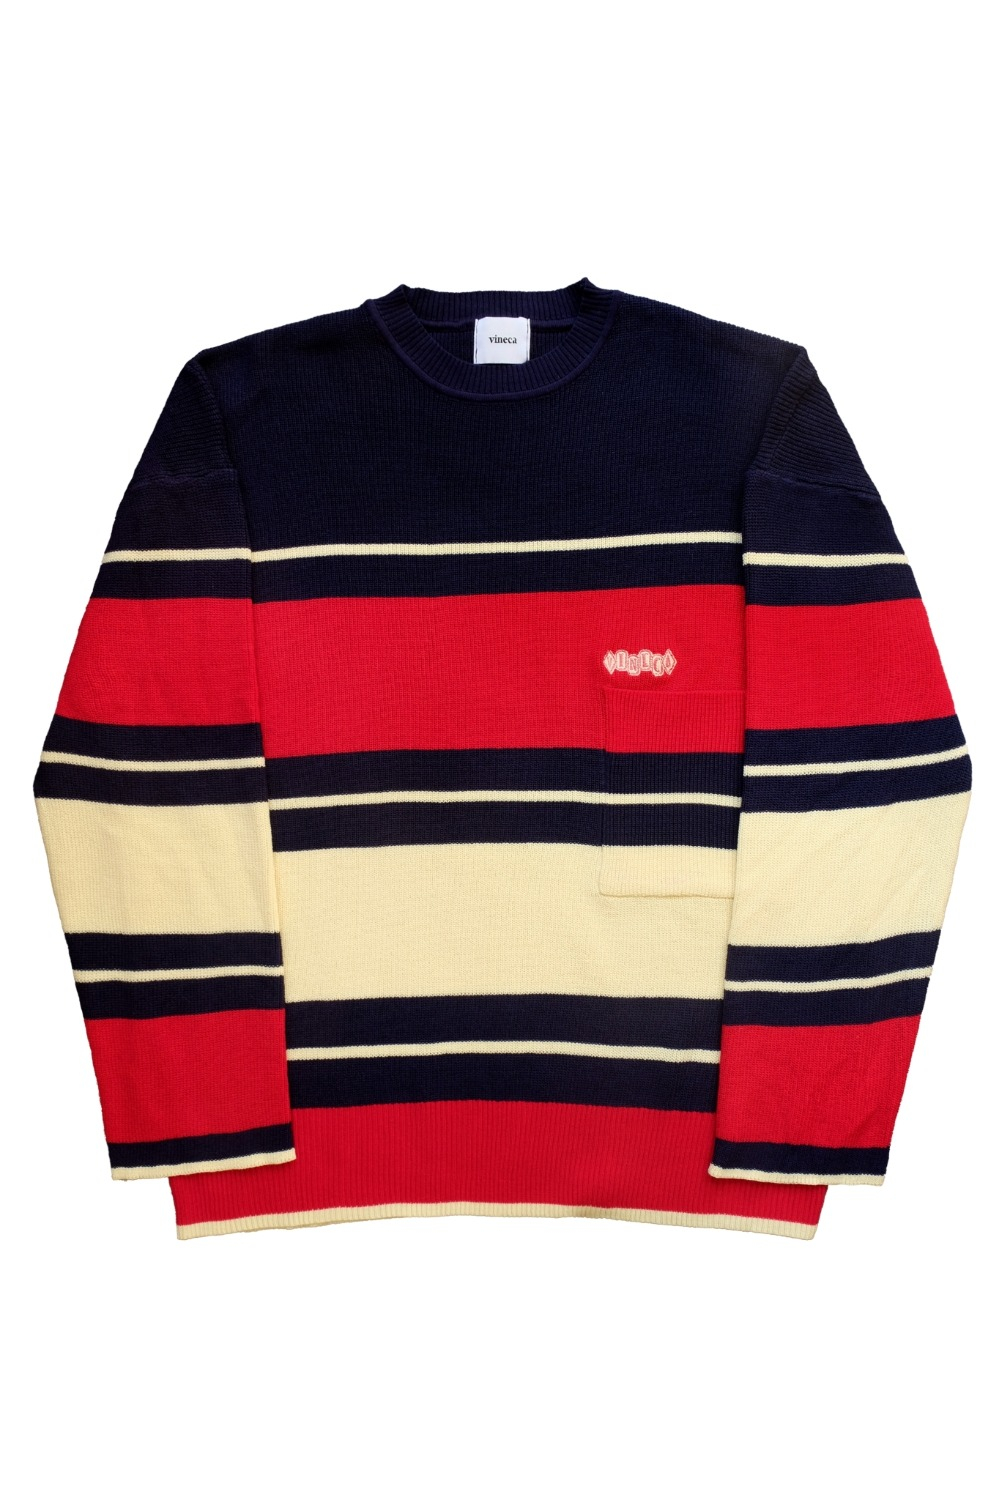 Vineca Knit Sweater (Navy-Red)